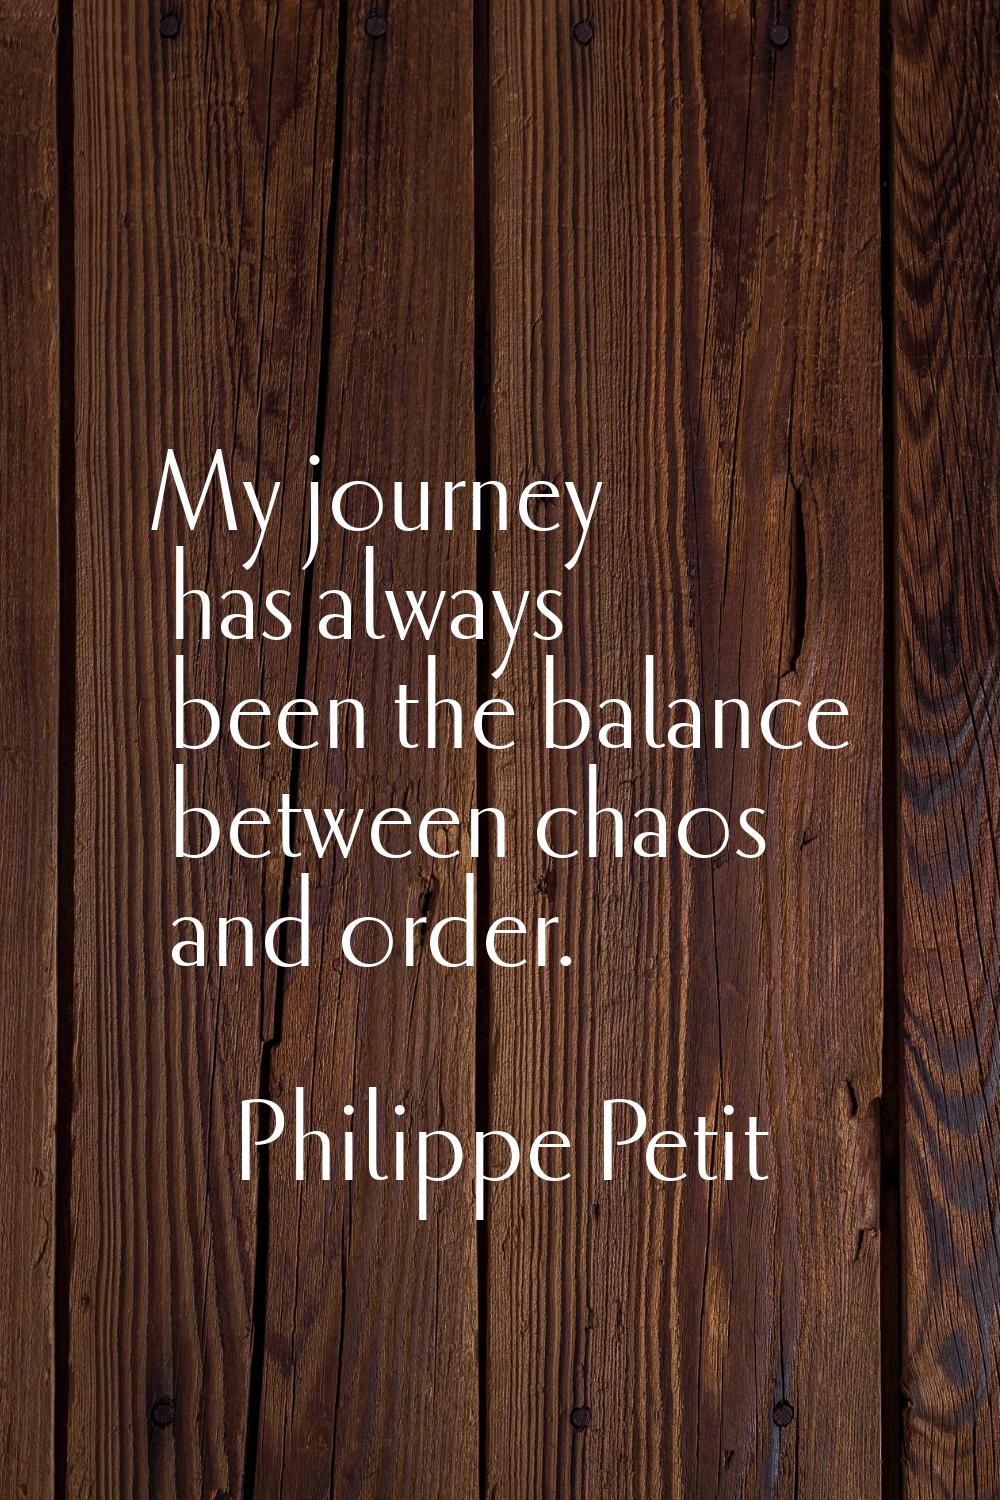 My journey has always been the balance between chaos and order.